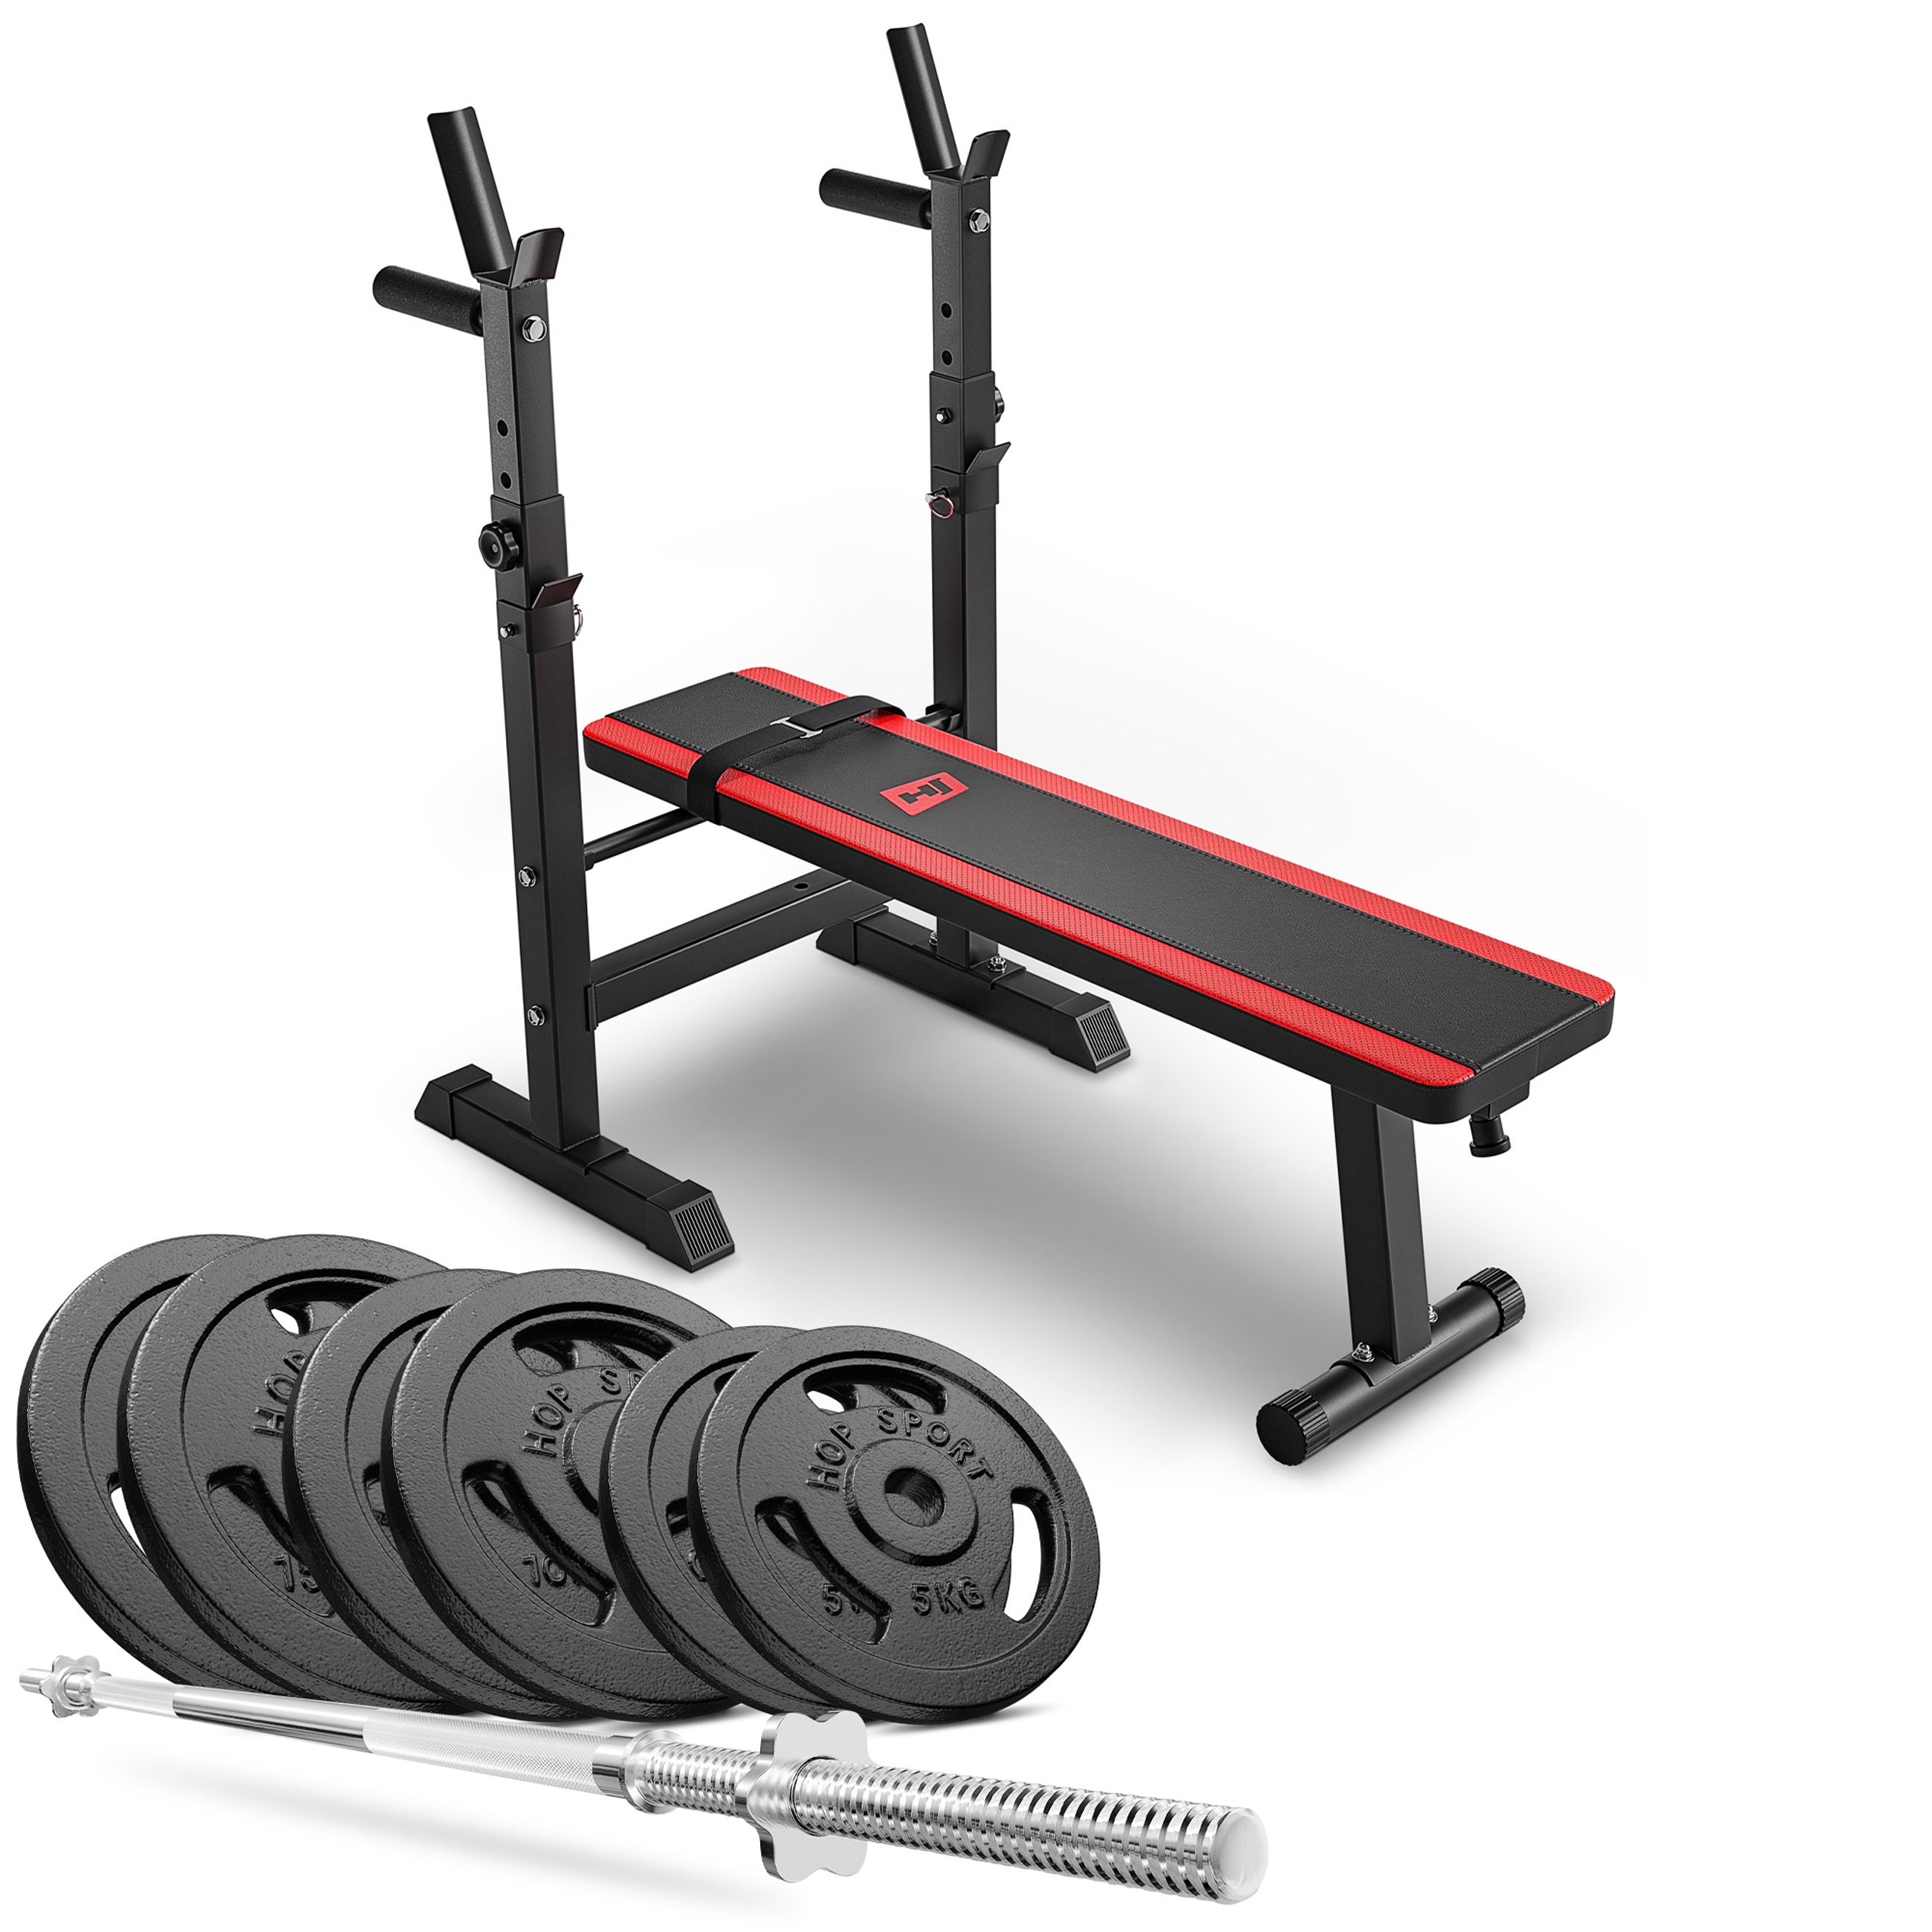 Strong 69 kg Cast Iron Barbell Set with HS-1080 Weight Bench